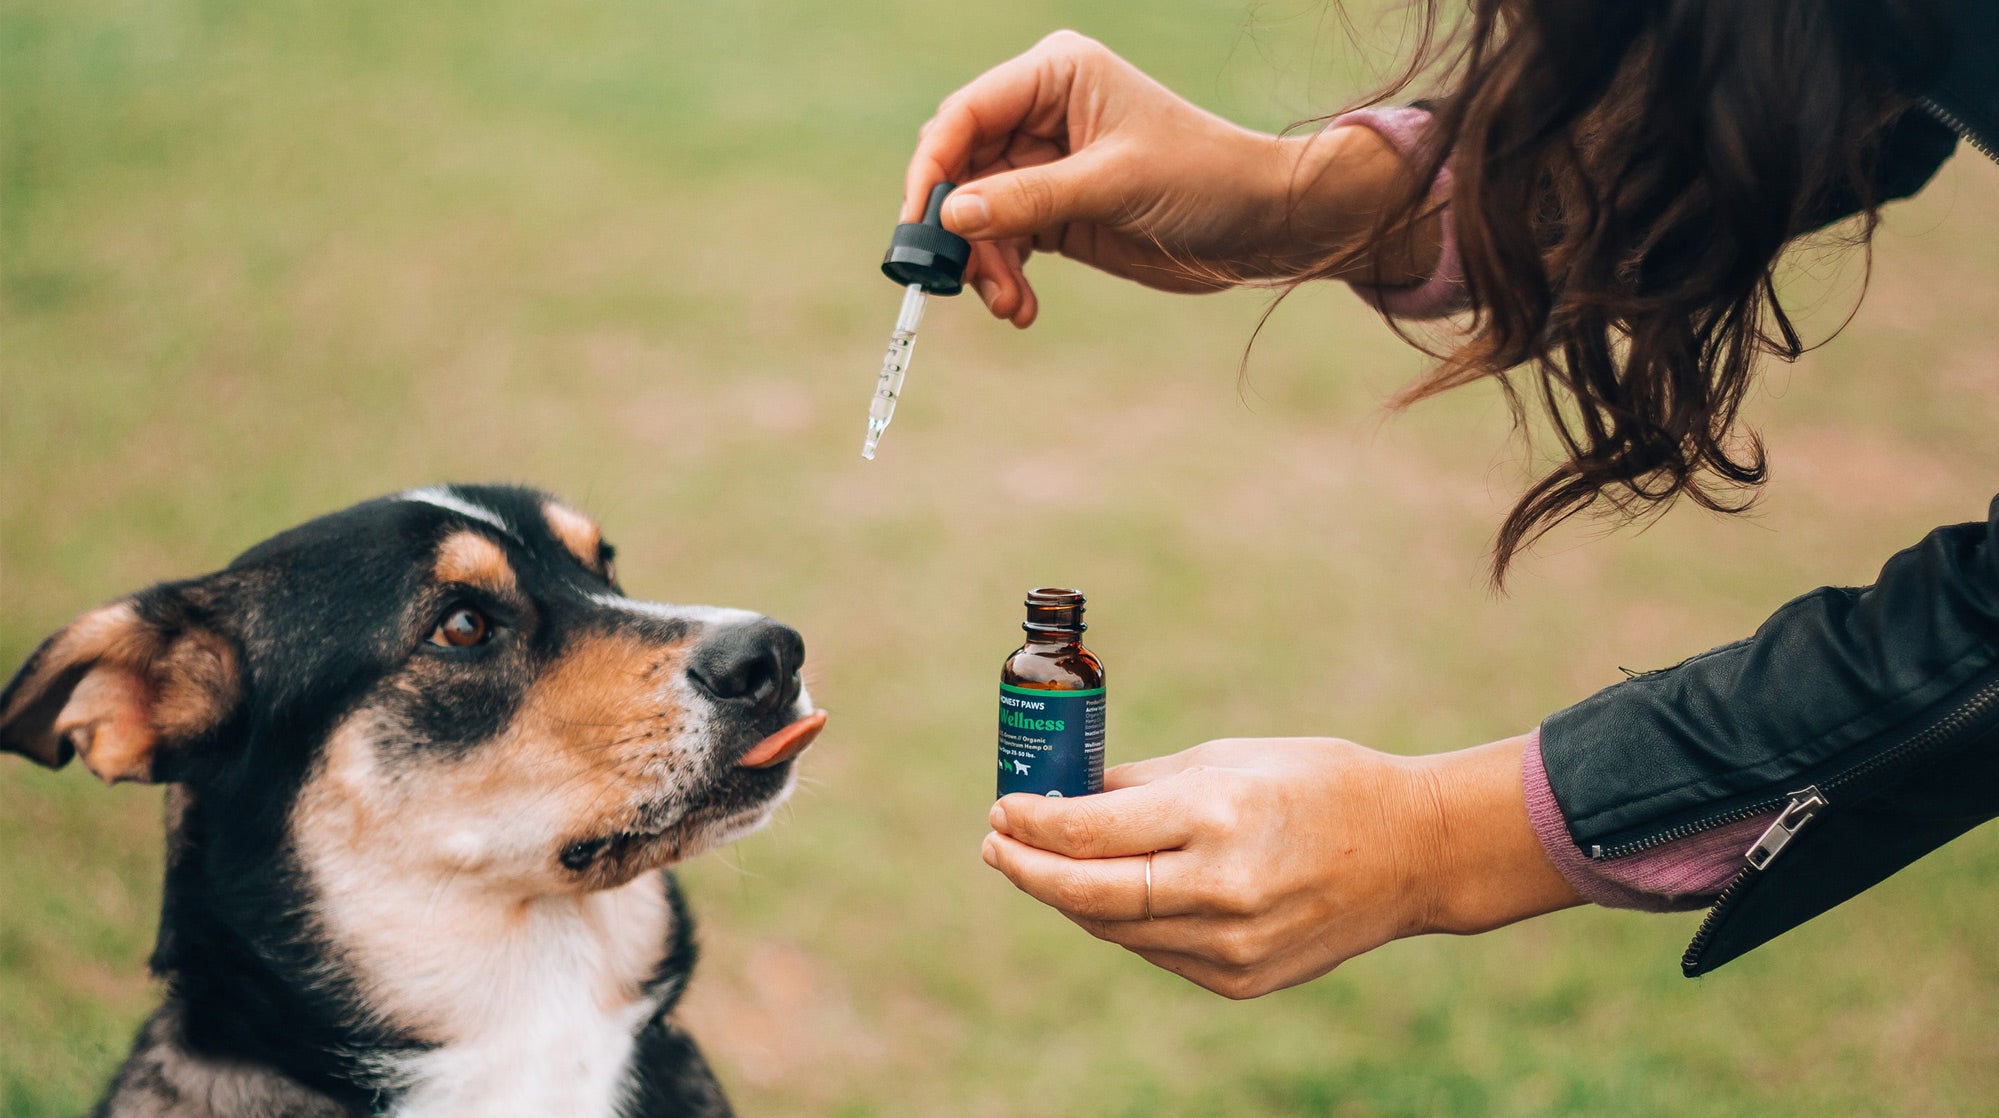 Treating your pet with CBD